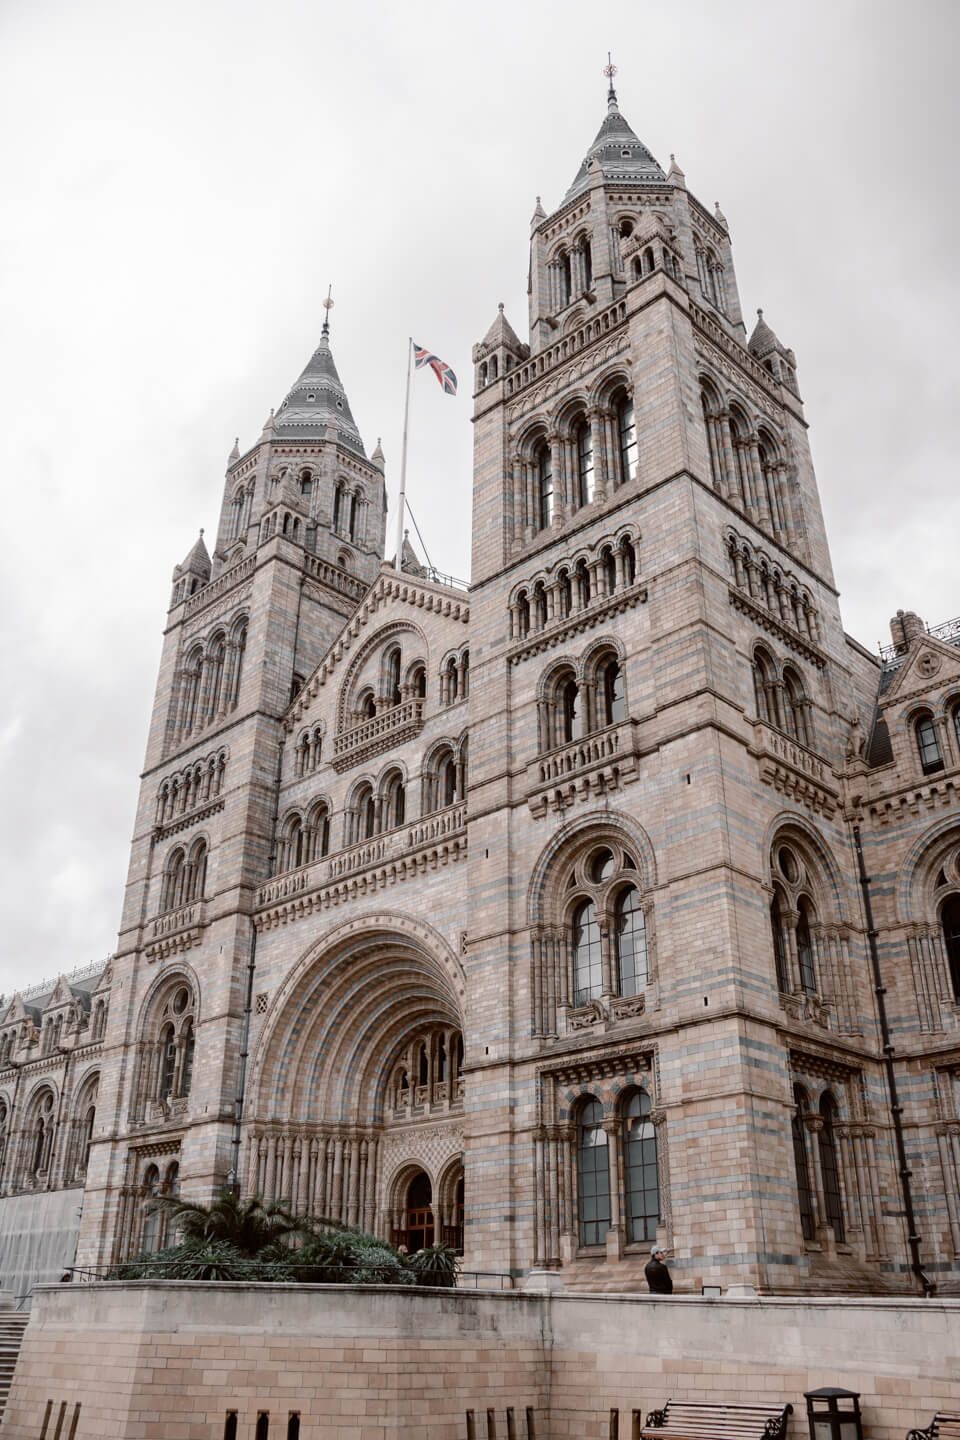 The National History Museum in London